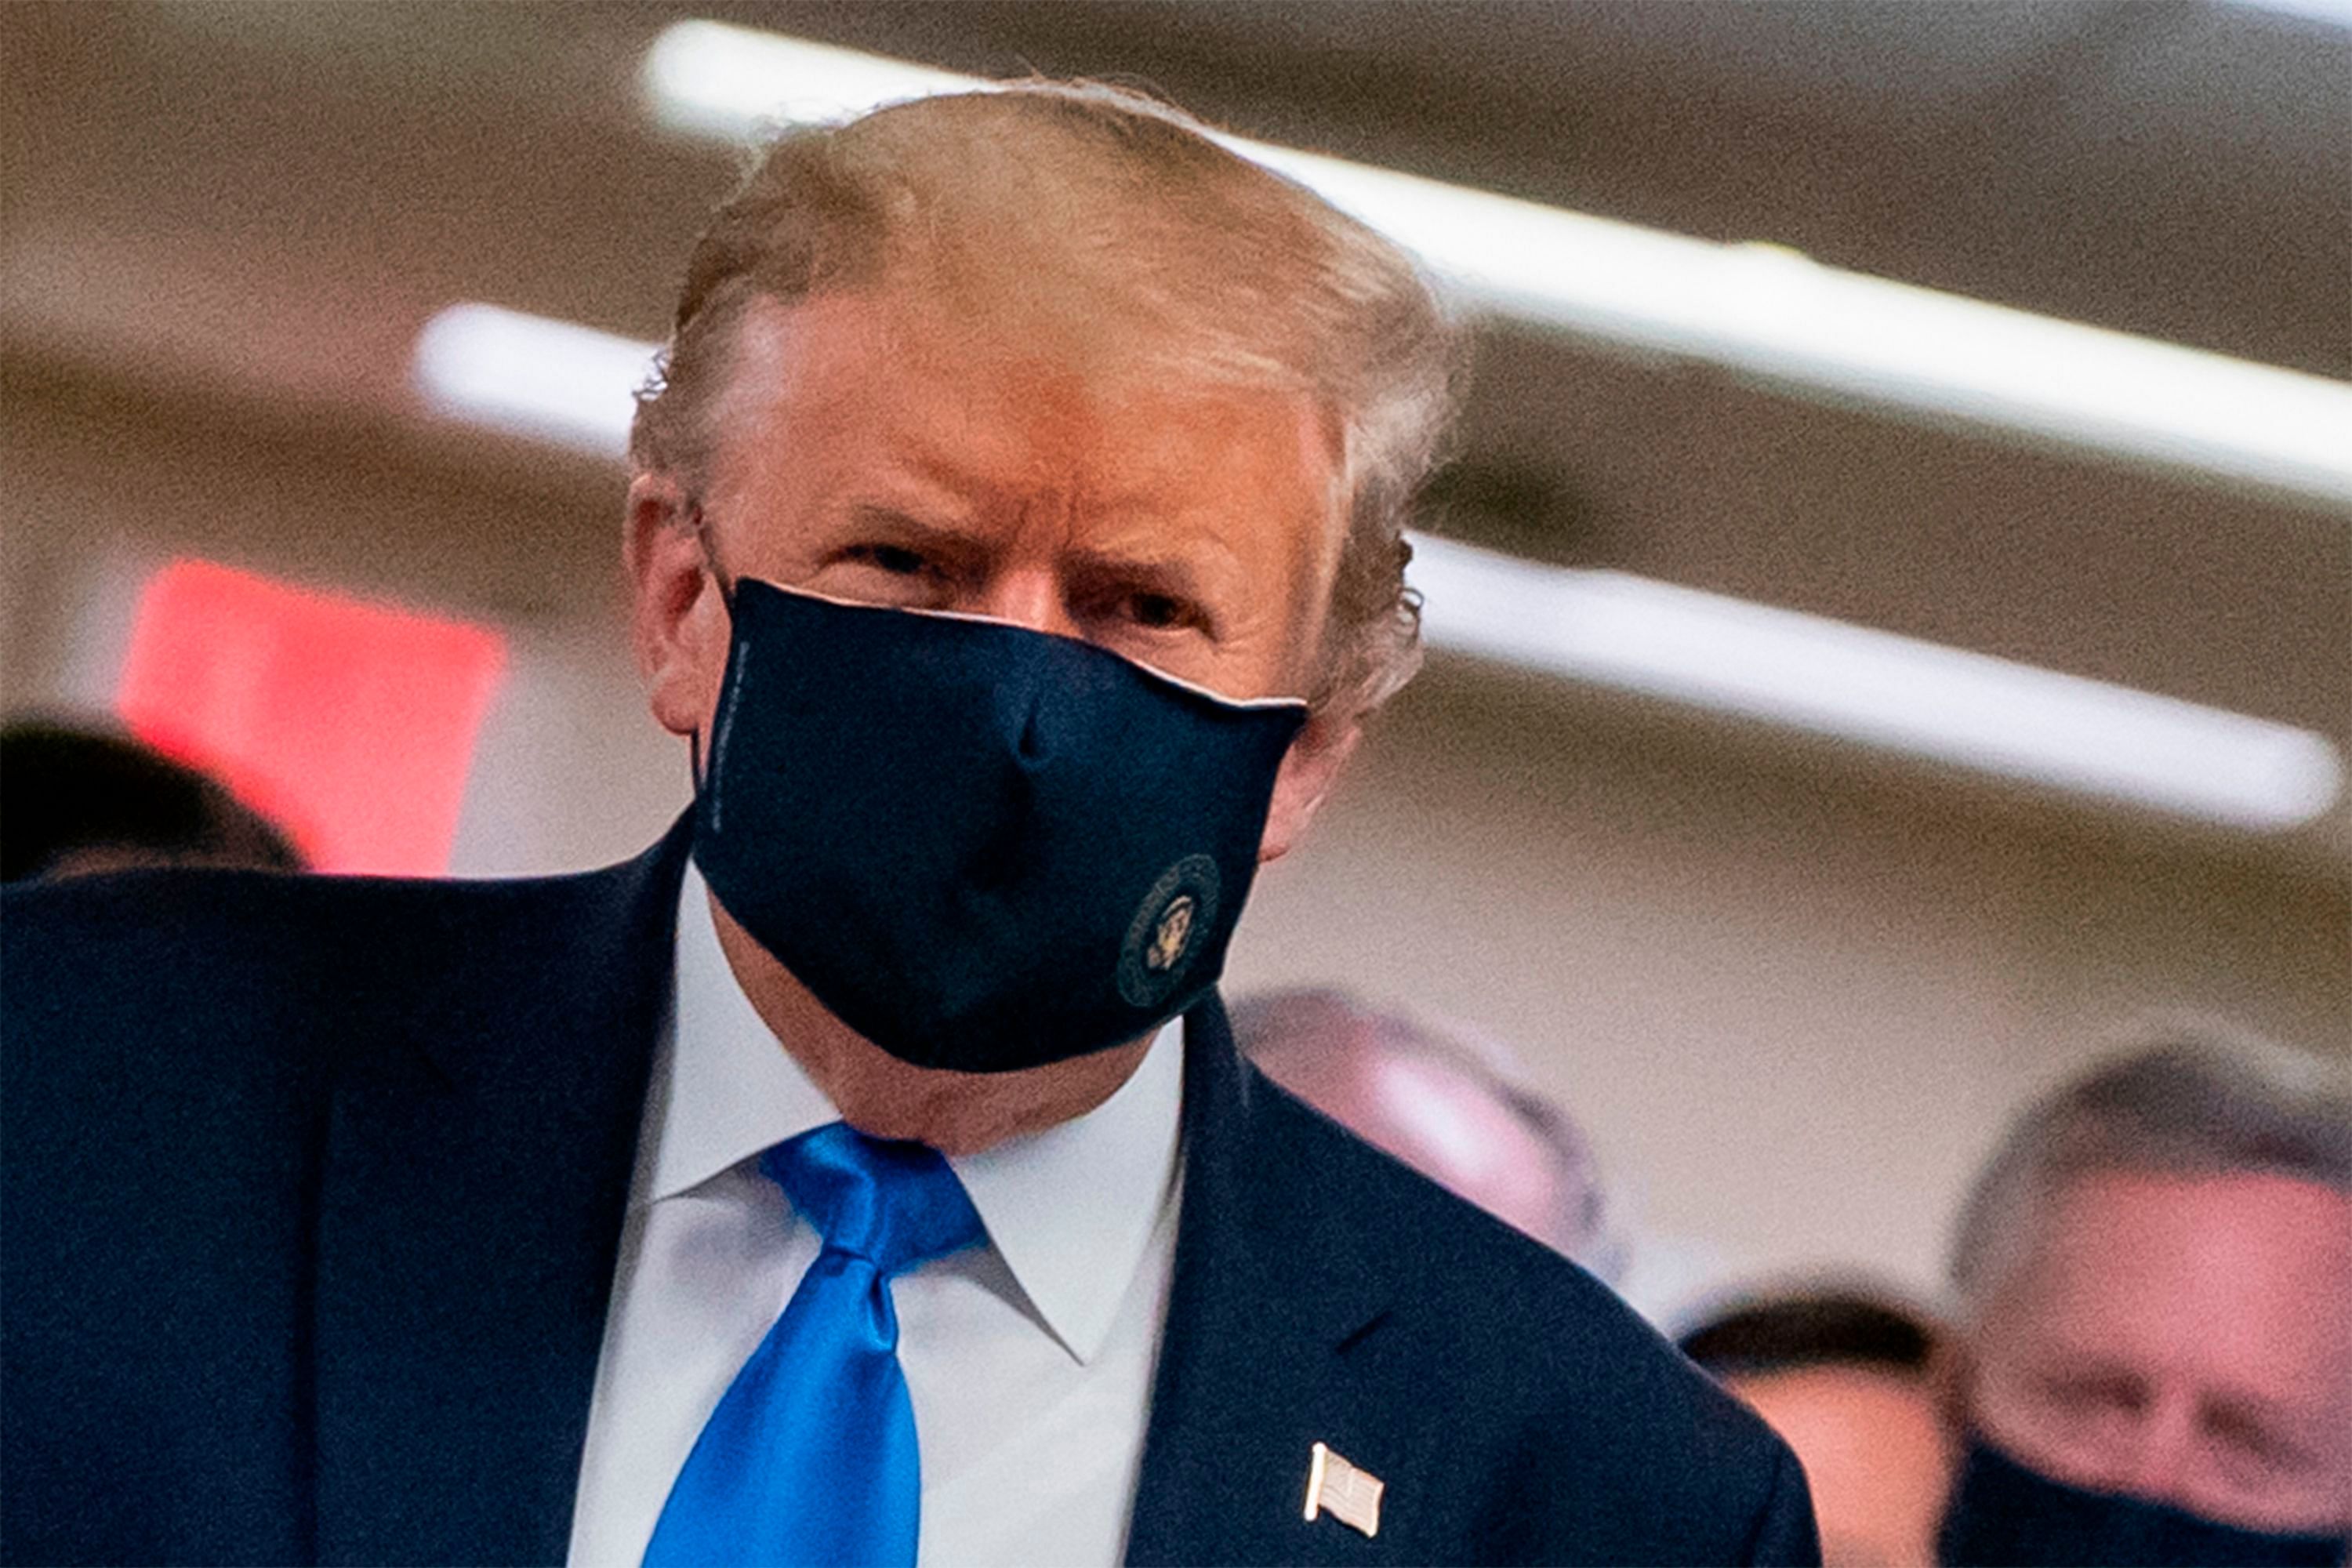 US President Donald Trump wears a mask as he visits Walter Reed National Military Medical Center in Bethesda, Maryland. - US President Donald Trump, who for months refused to encourage mask wearing as a way to combat the coronavirus, on July 20, 2020 tweeted a picture of himself with his face covered and touted his patriotism. Credit: AFP Photo